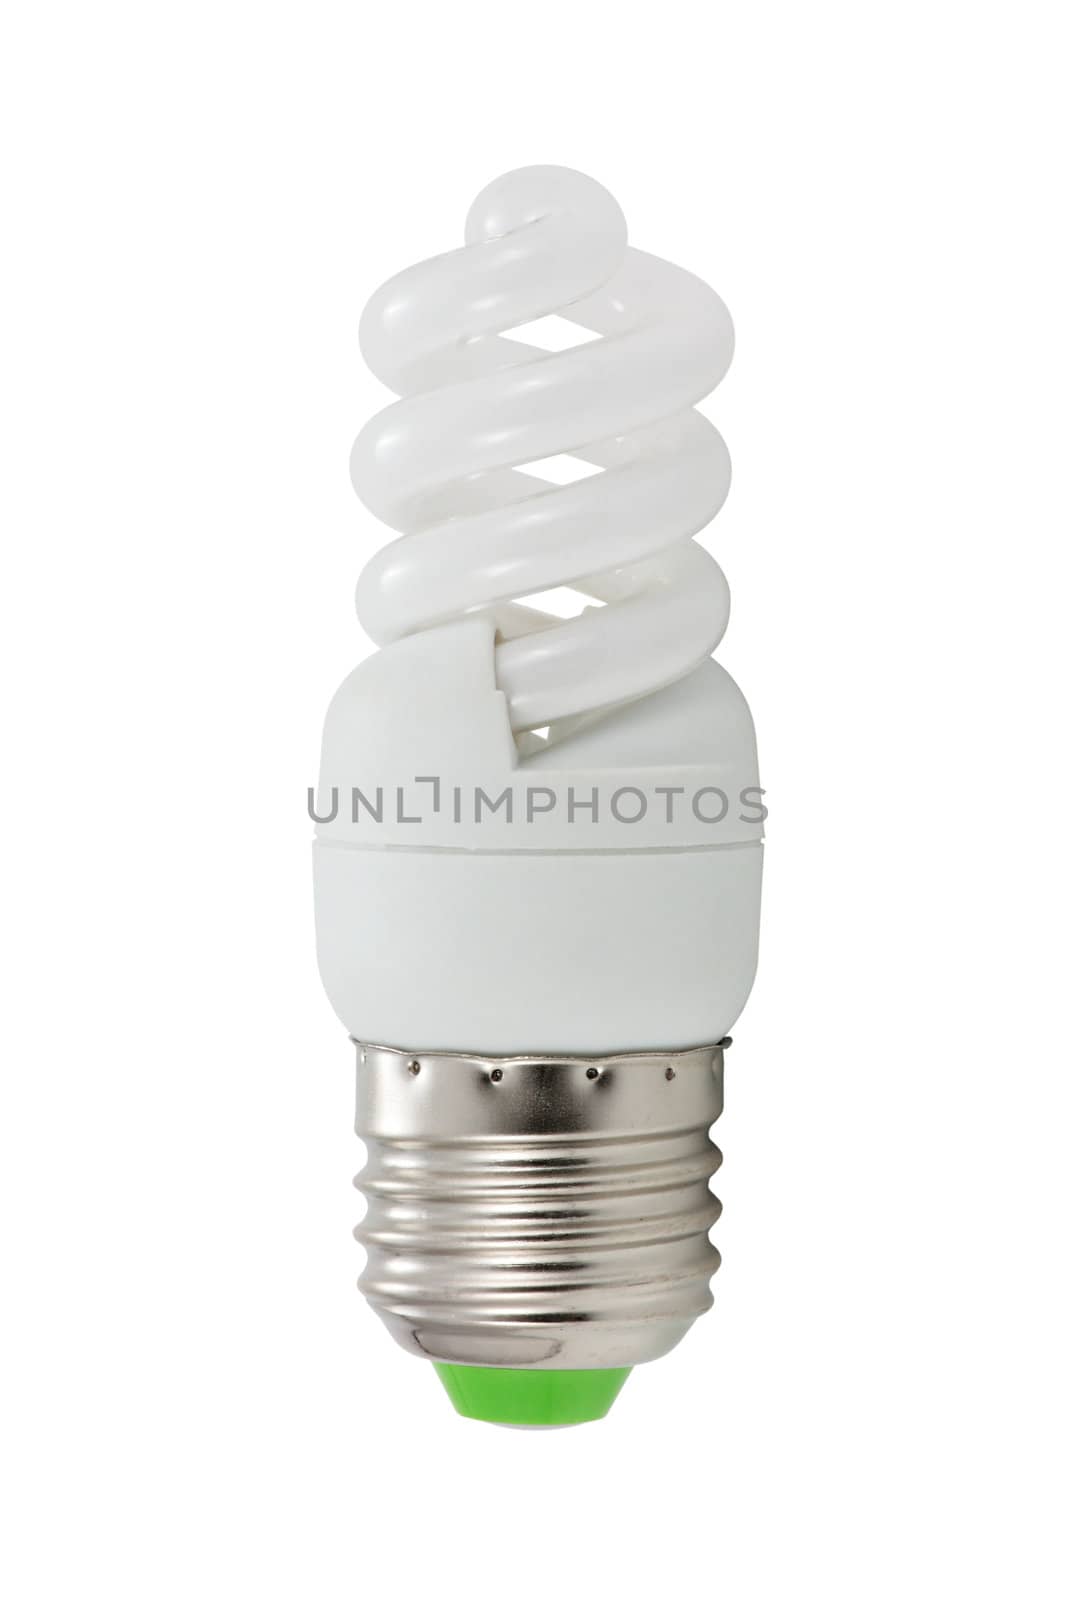 eco bulb trimmed low consumption and isolated